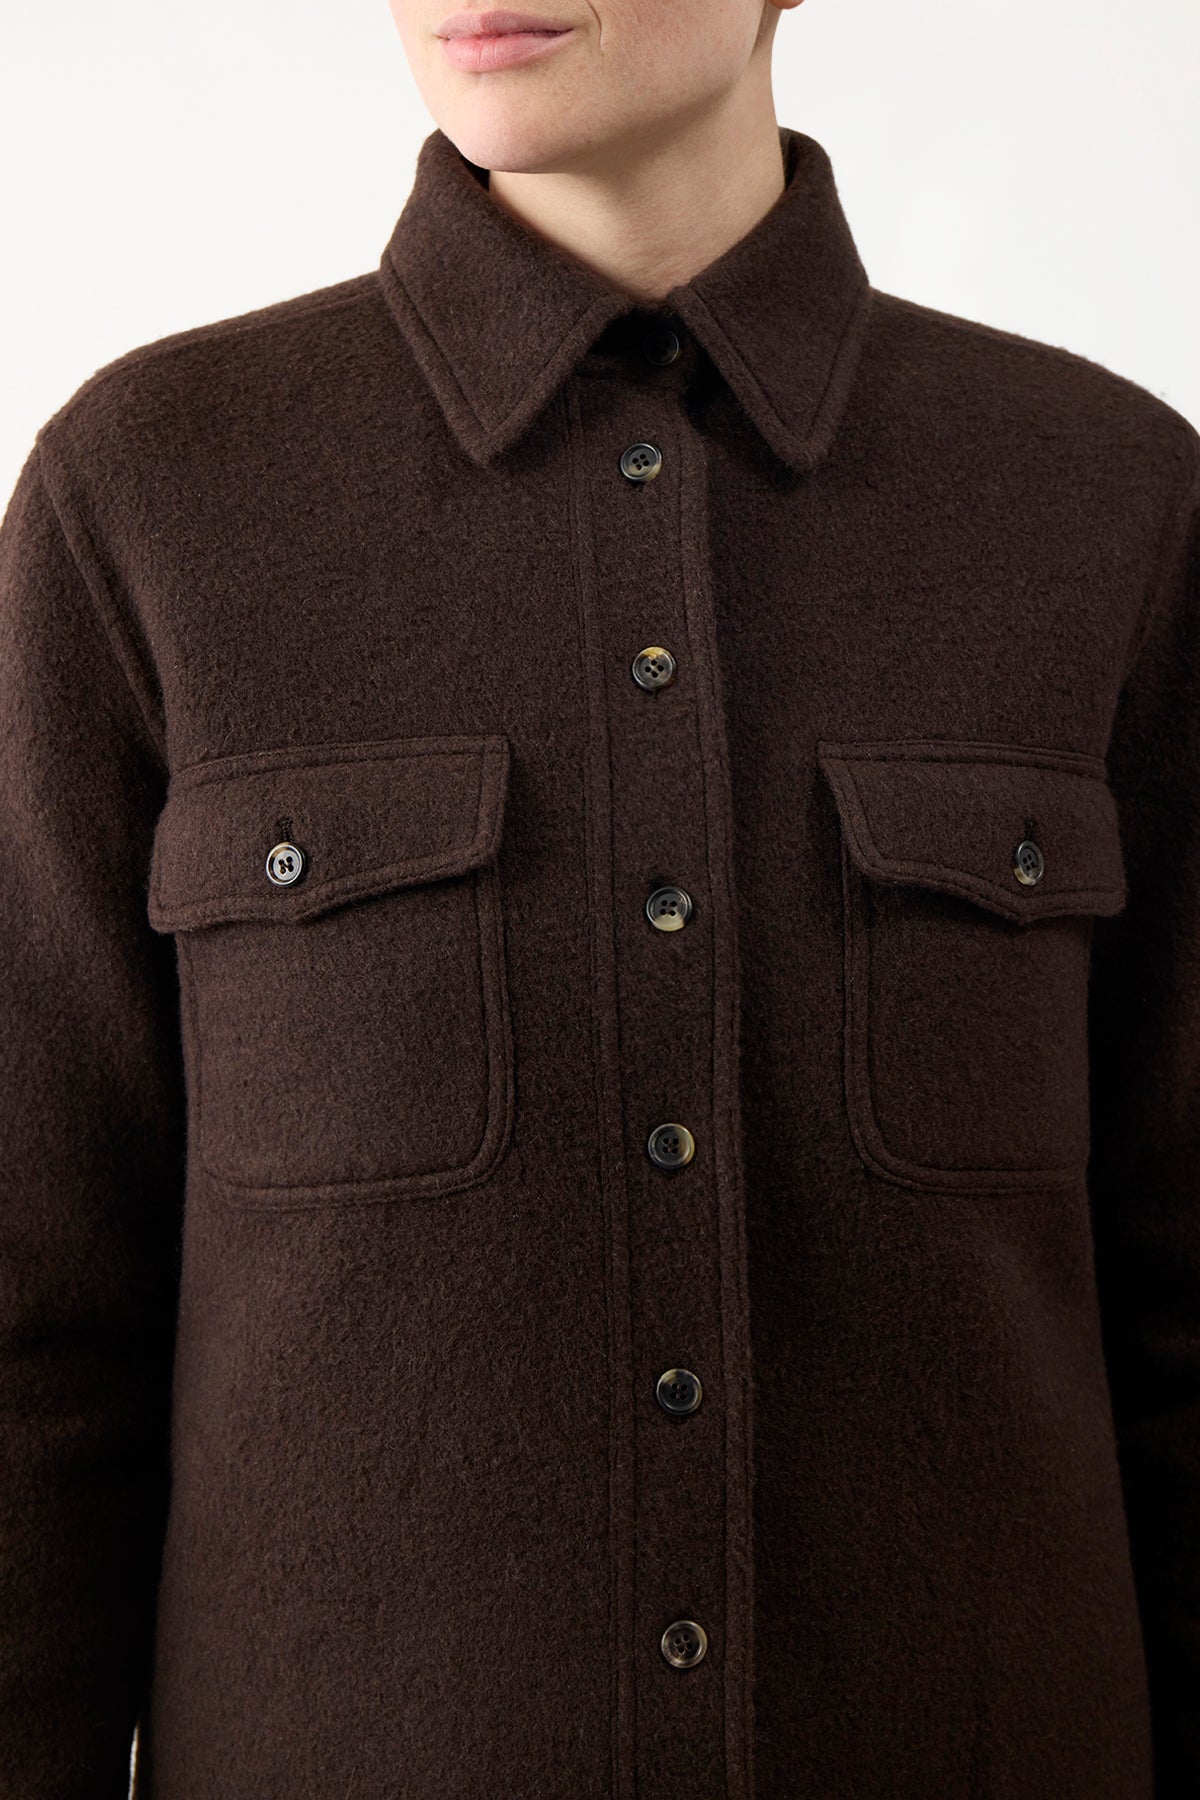 John Austin Top in Chocolate Recycled Cashmere Felt